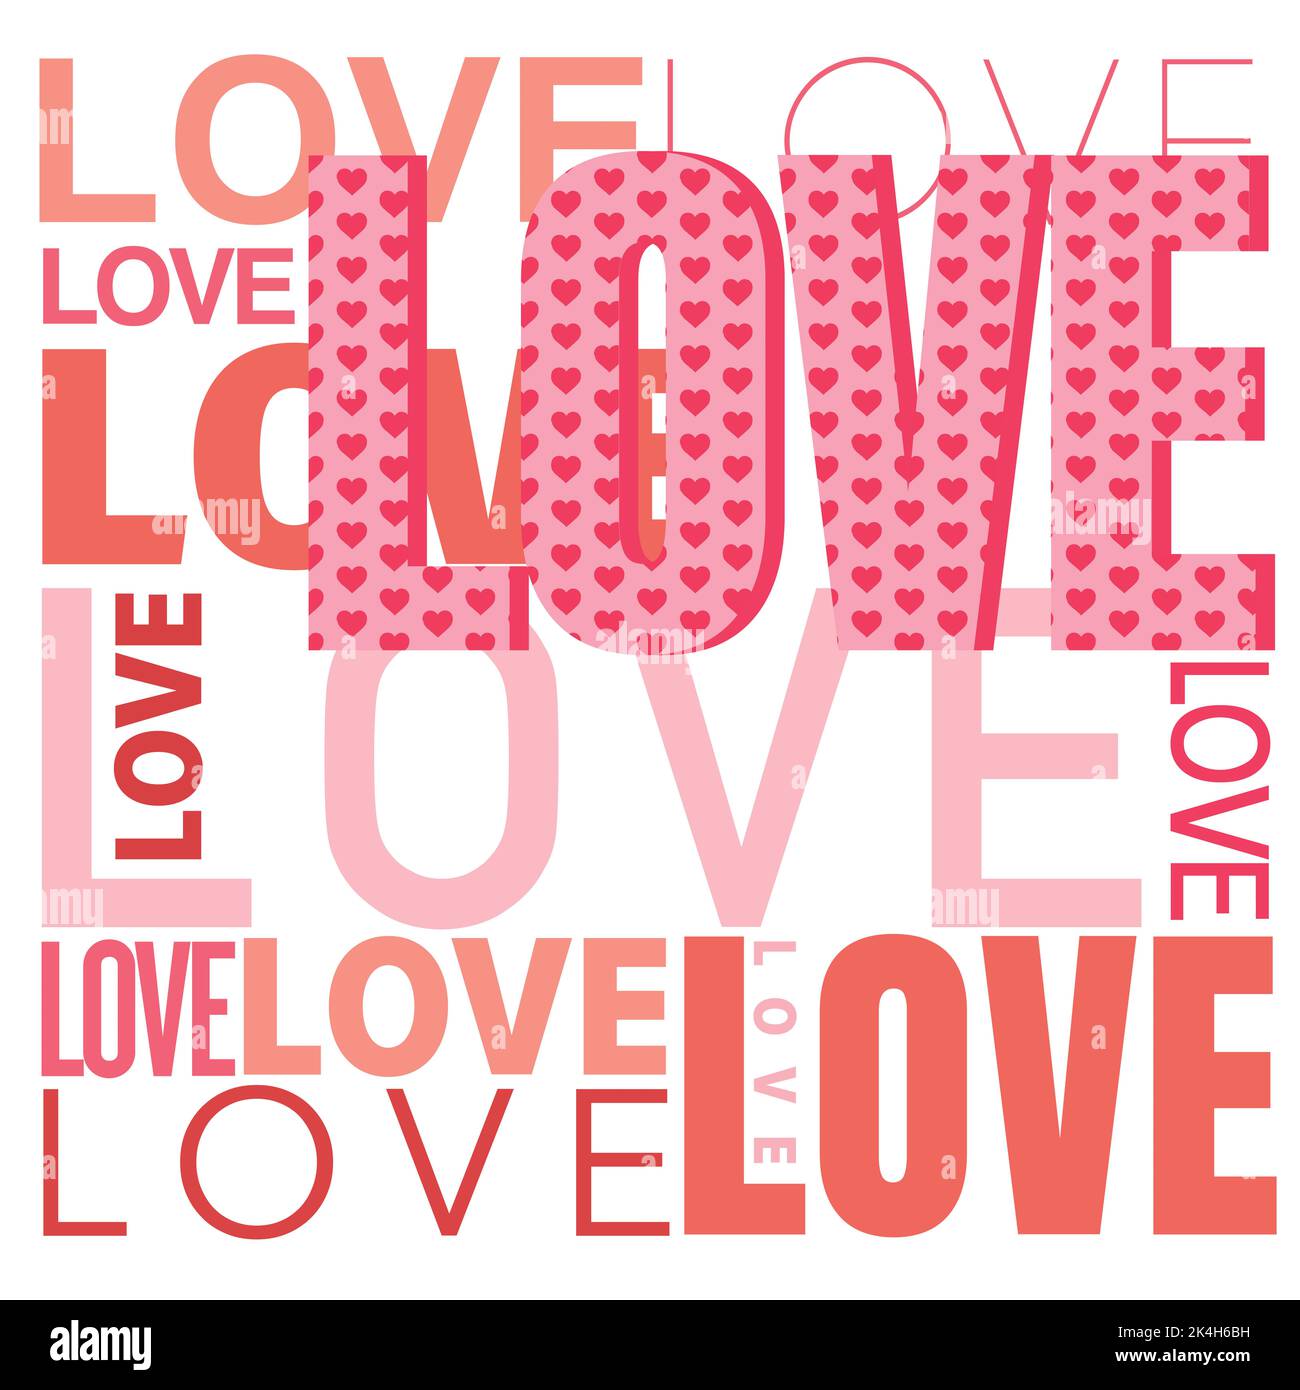 Digitally generated illustration of love text in different fonts on ...